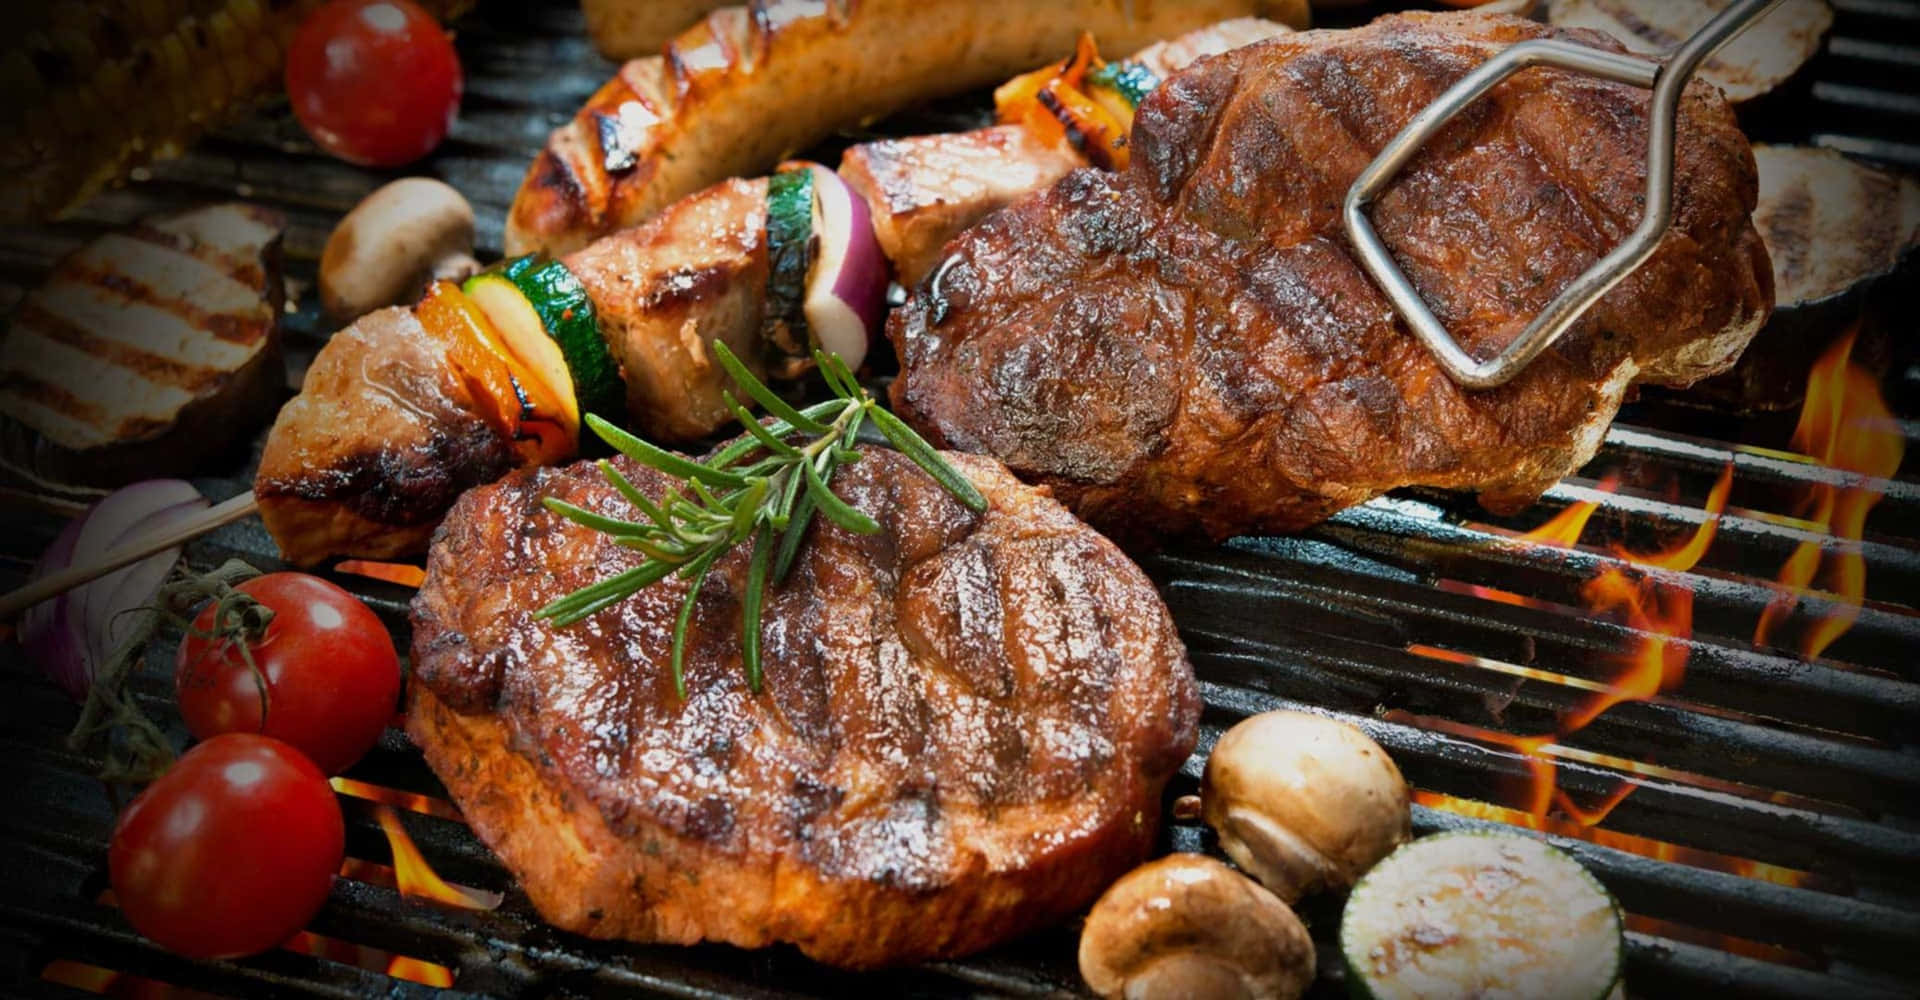 Enjoy a delicious day of barbequing with friends!